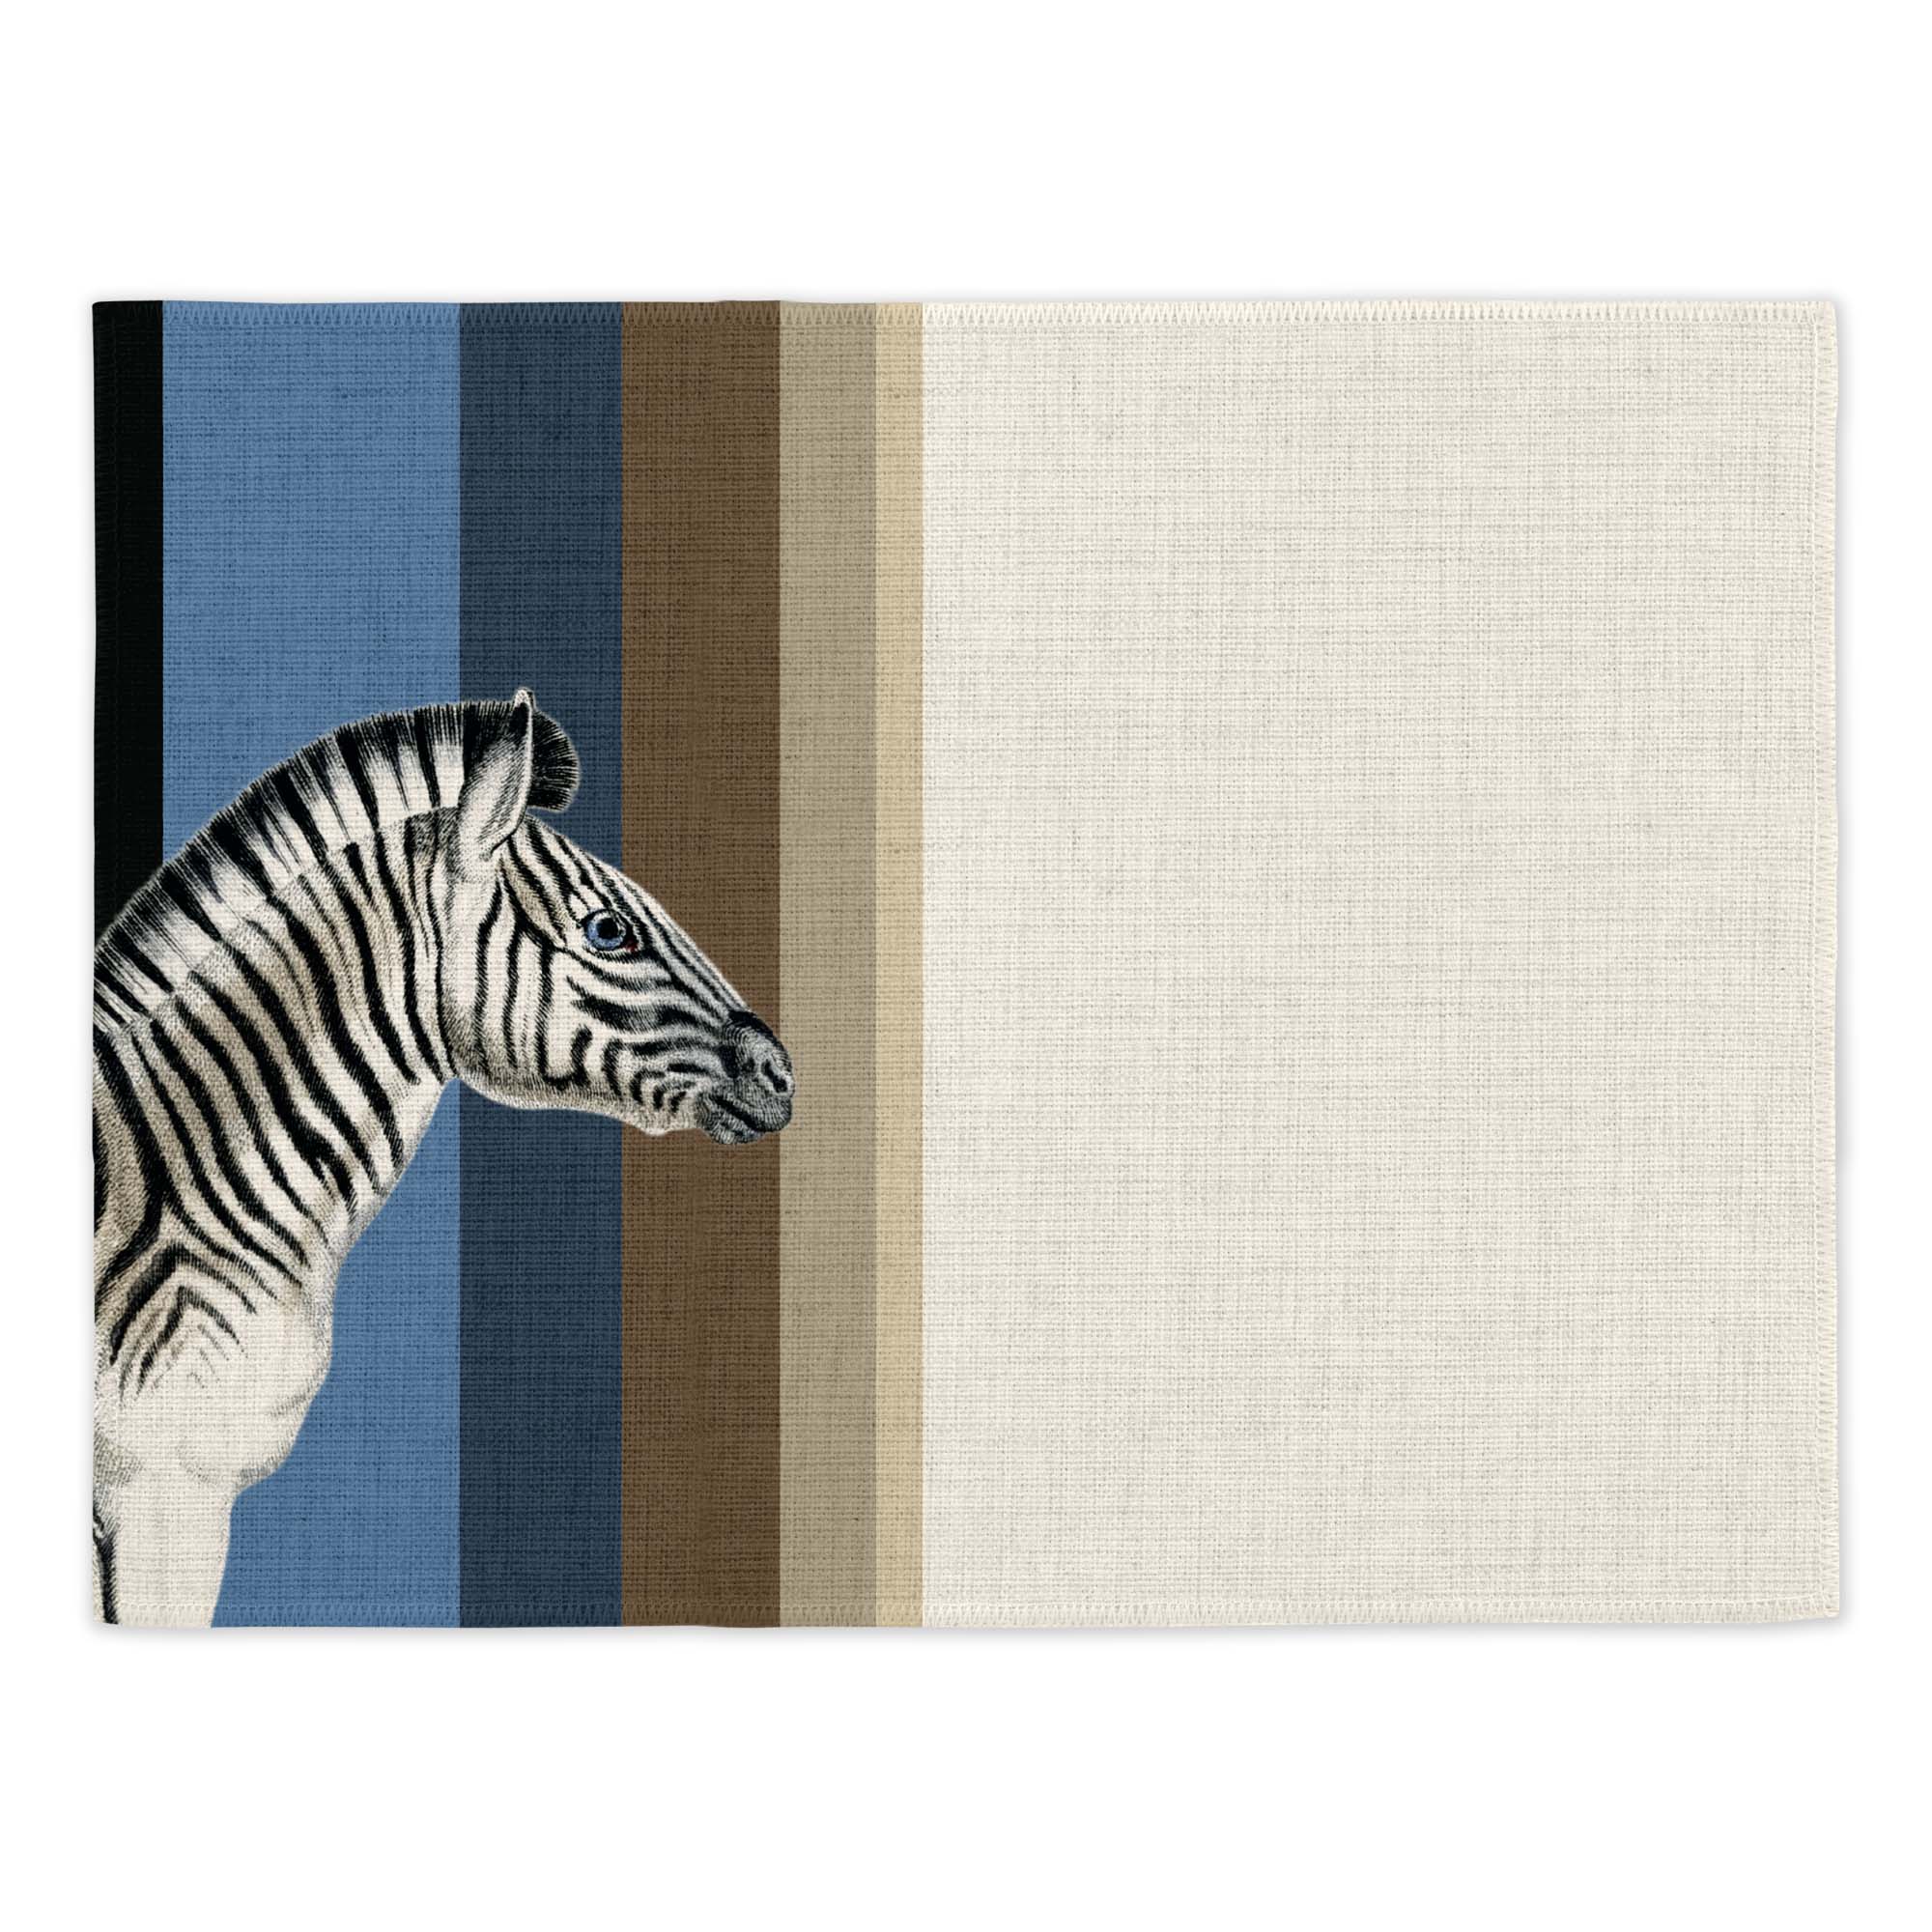 Zebra Stripe Placemats (Set of Four) Placemats Mustard and Gray Ltd Shropshire UK